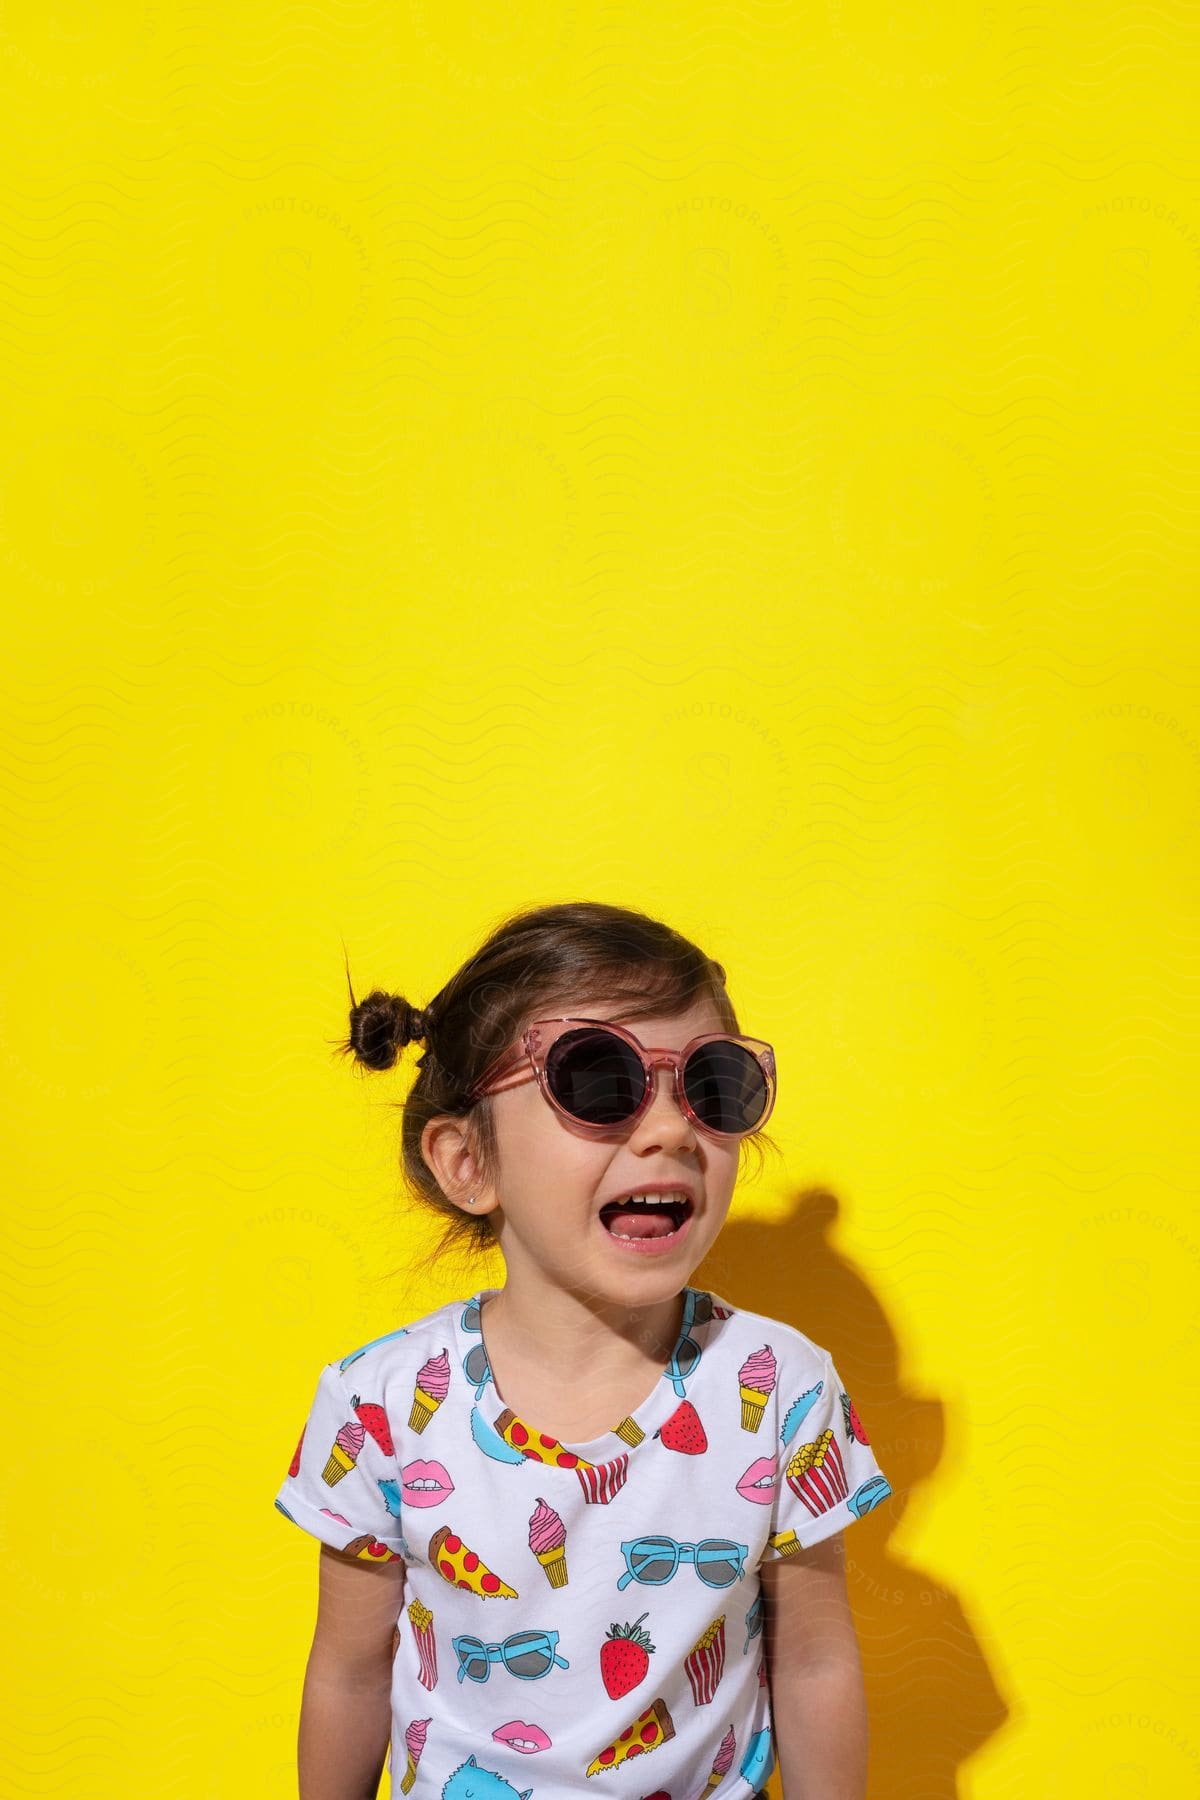 A little girl laughing wearing sunglasses and a shirt patterned with summer treats stands in front of a yellow wall, her shadow merging with the background.